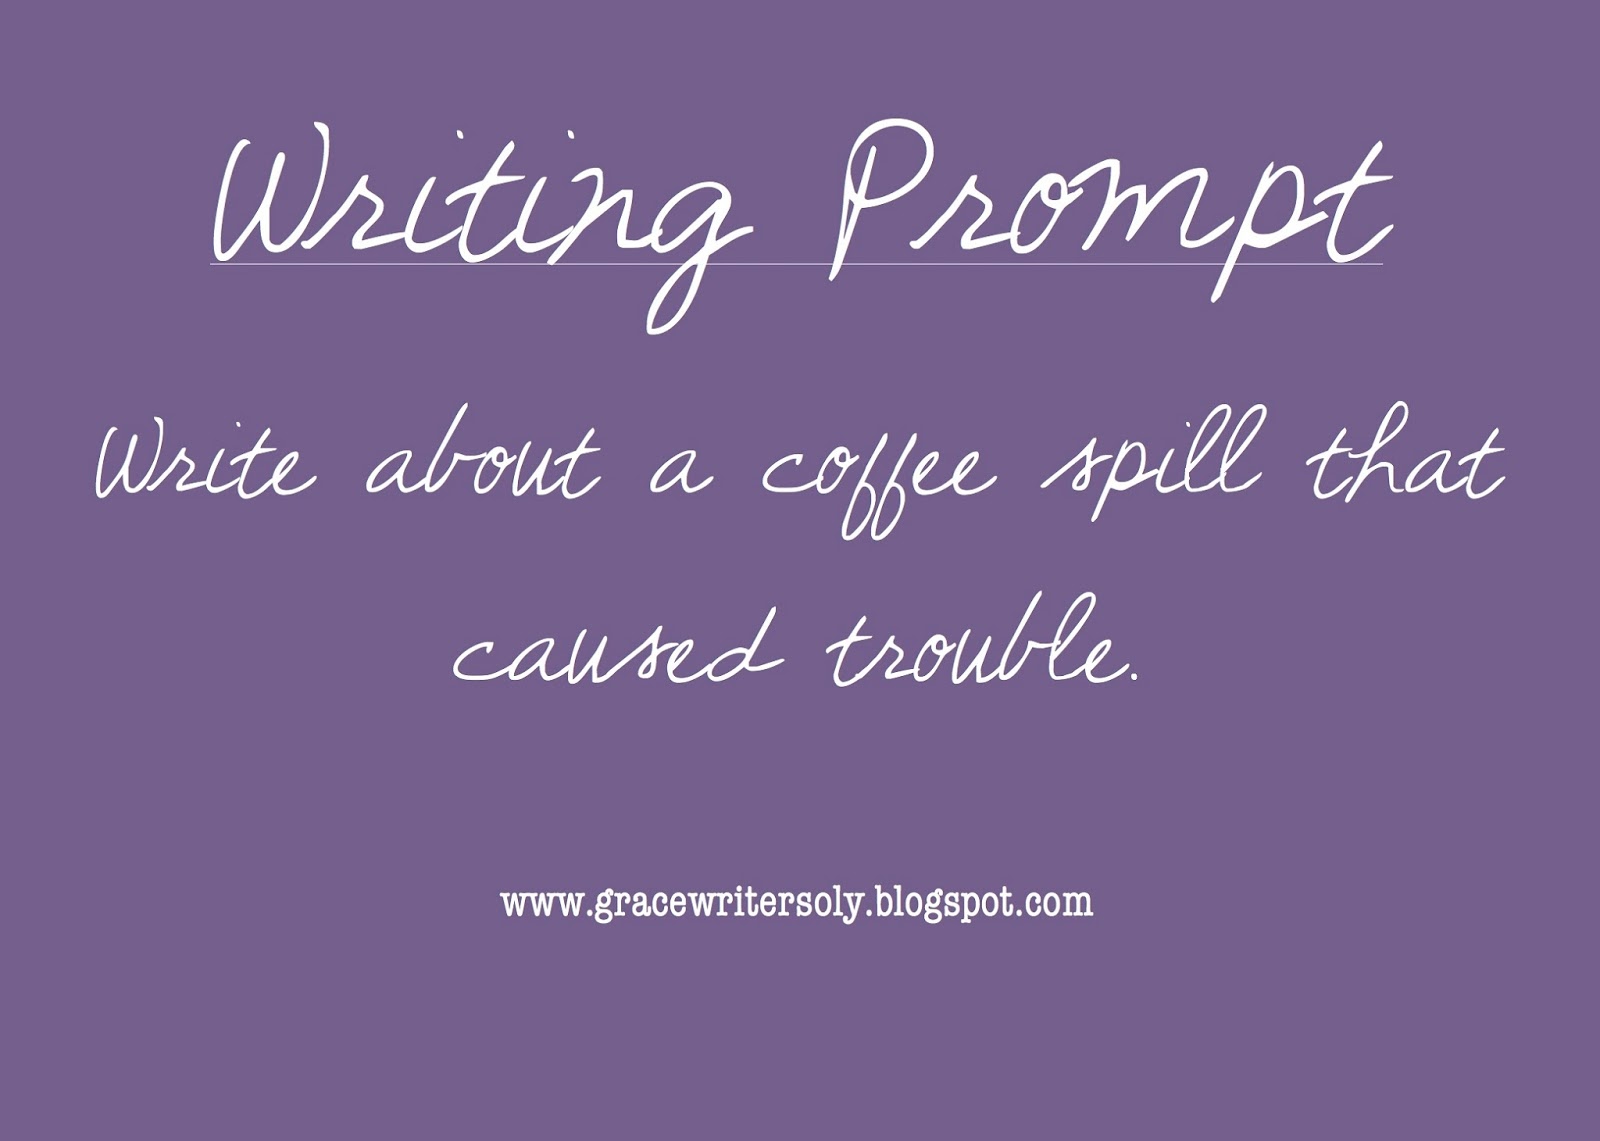 Grace Writers: Writing Prompt